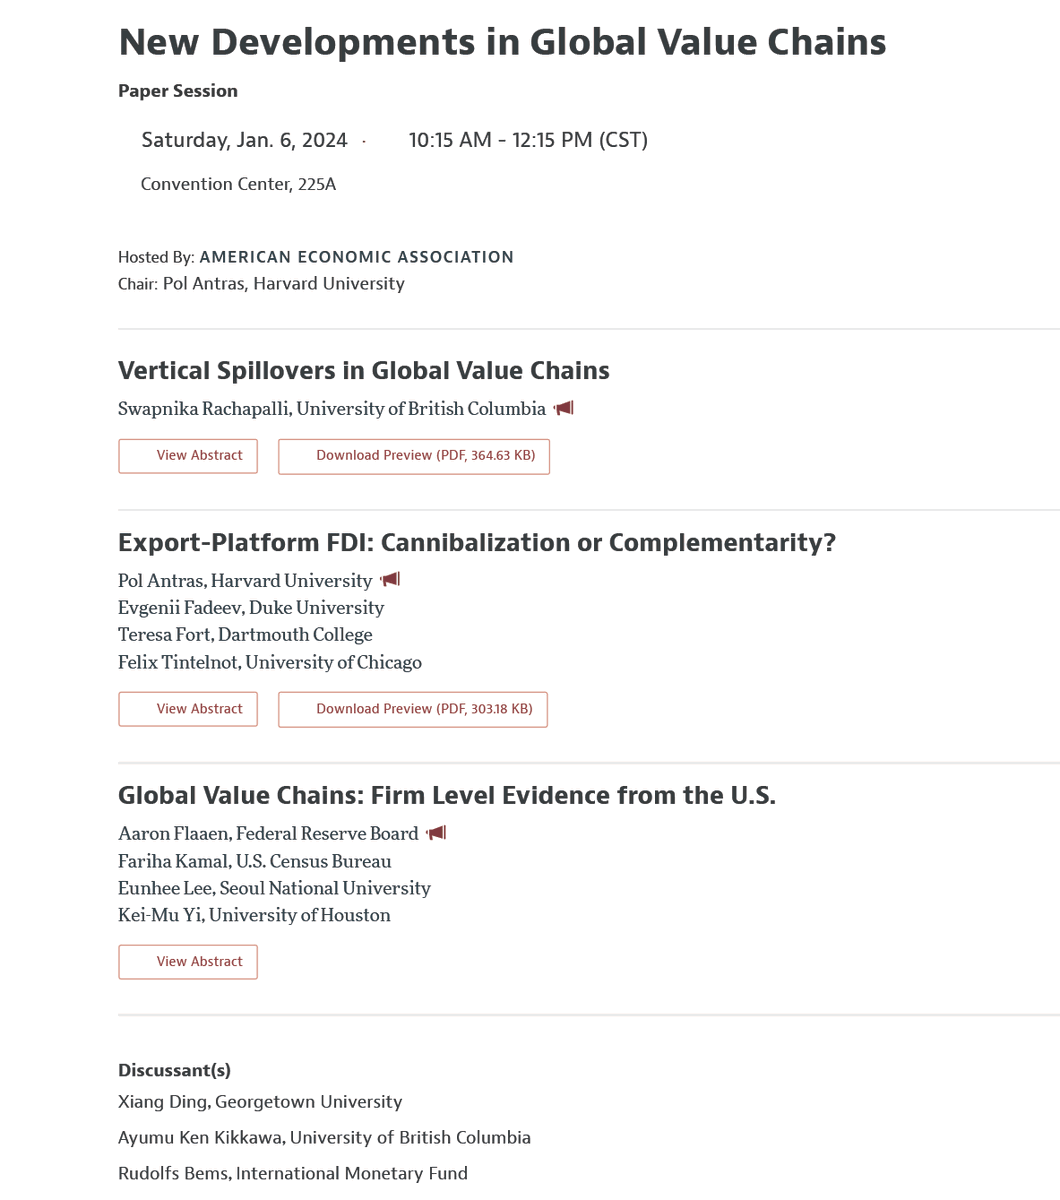 For those planning to attend, I'm told it's likely to start a few minutes late (around 12:45pm) to give more time for folks to make their way from the morning session...

... which is a good thing because I'm presenting in this great session on New Developments in GVCs! #ASSA2024